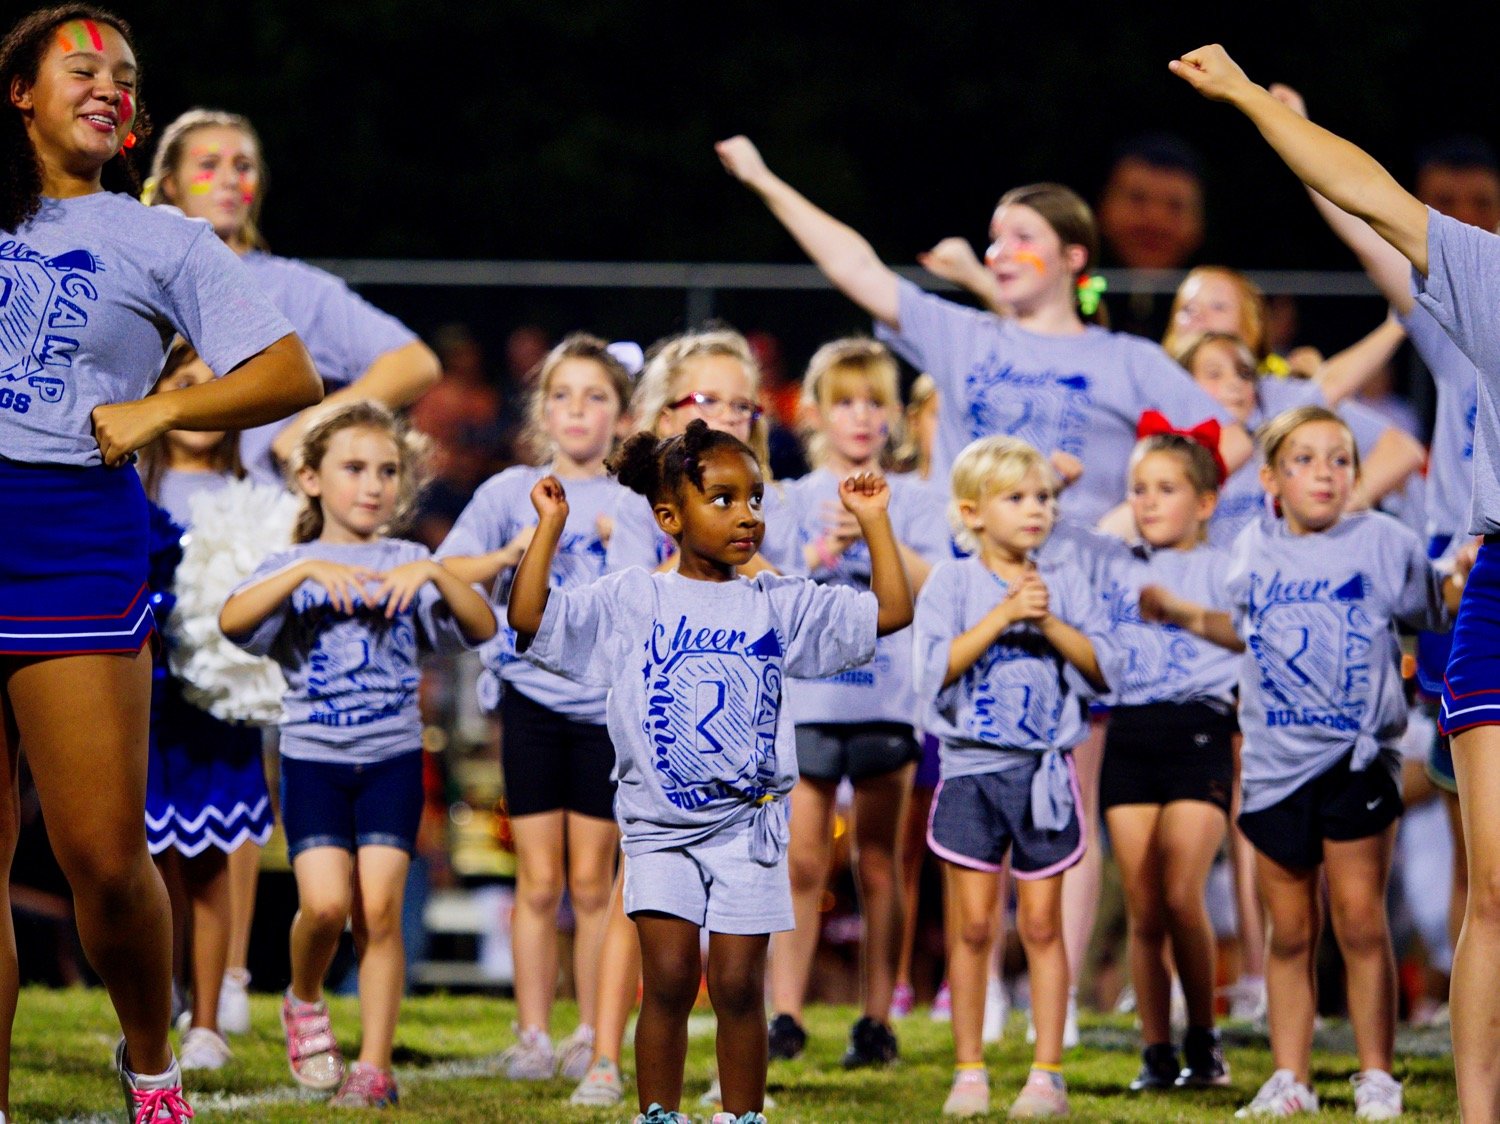 Participants of the Quitman varsity cheerleaders' mini-camp show off their new moves during halftime. [catch more cheer-worthy captures]